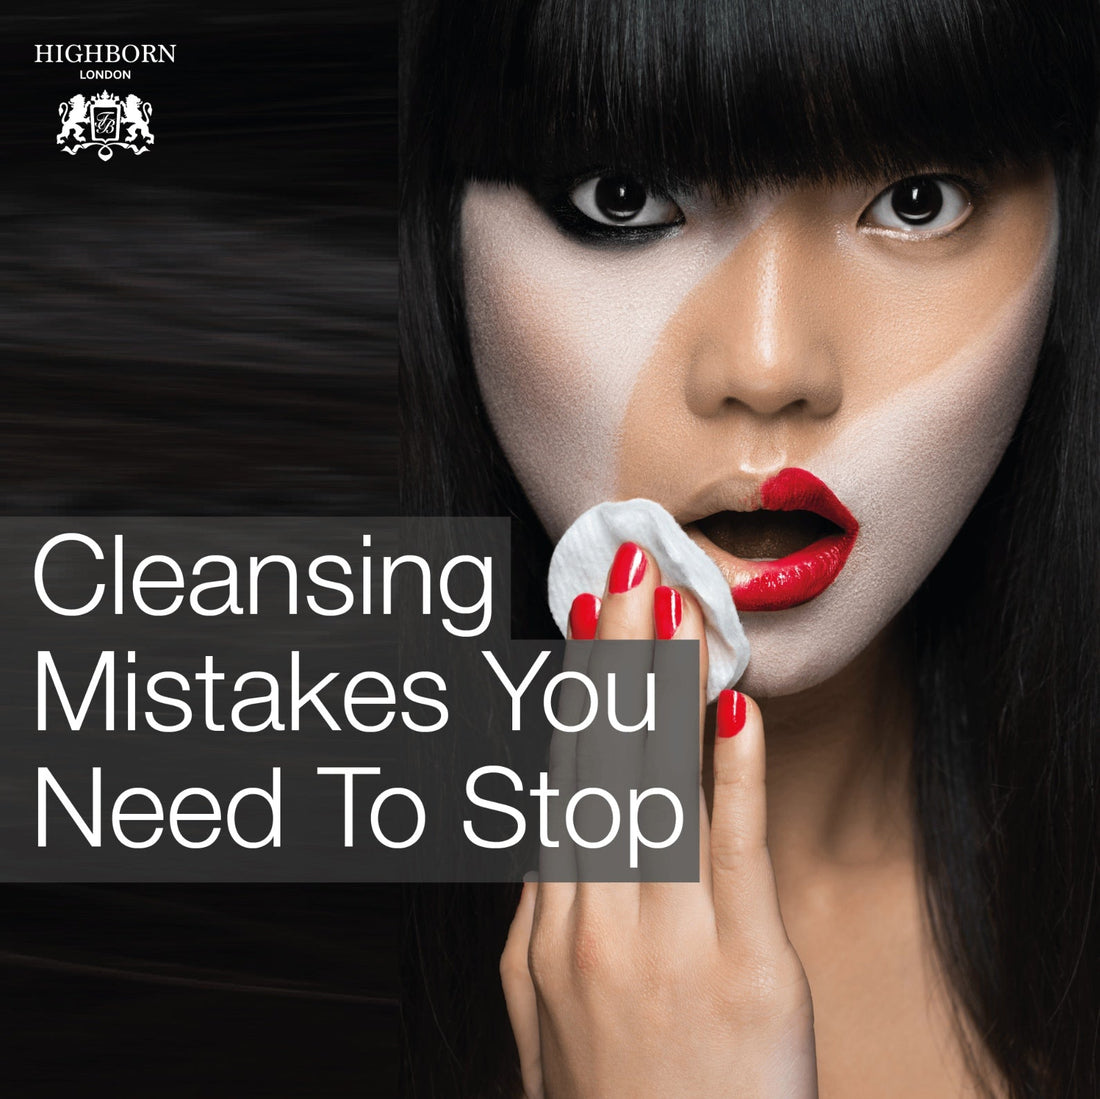 7 Common Cleansing Mistakes You Need To Stop - HighBorn London